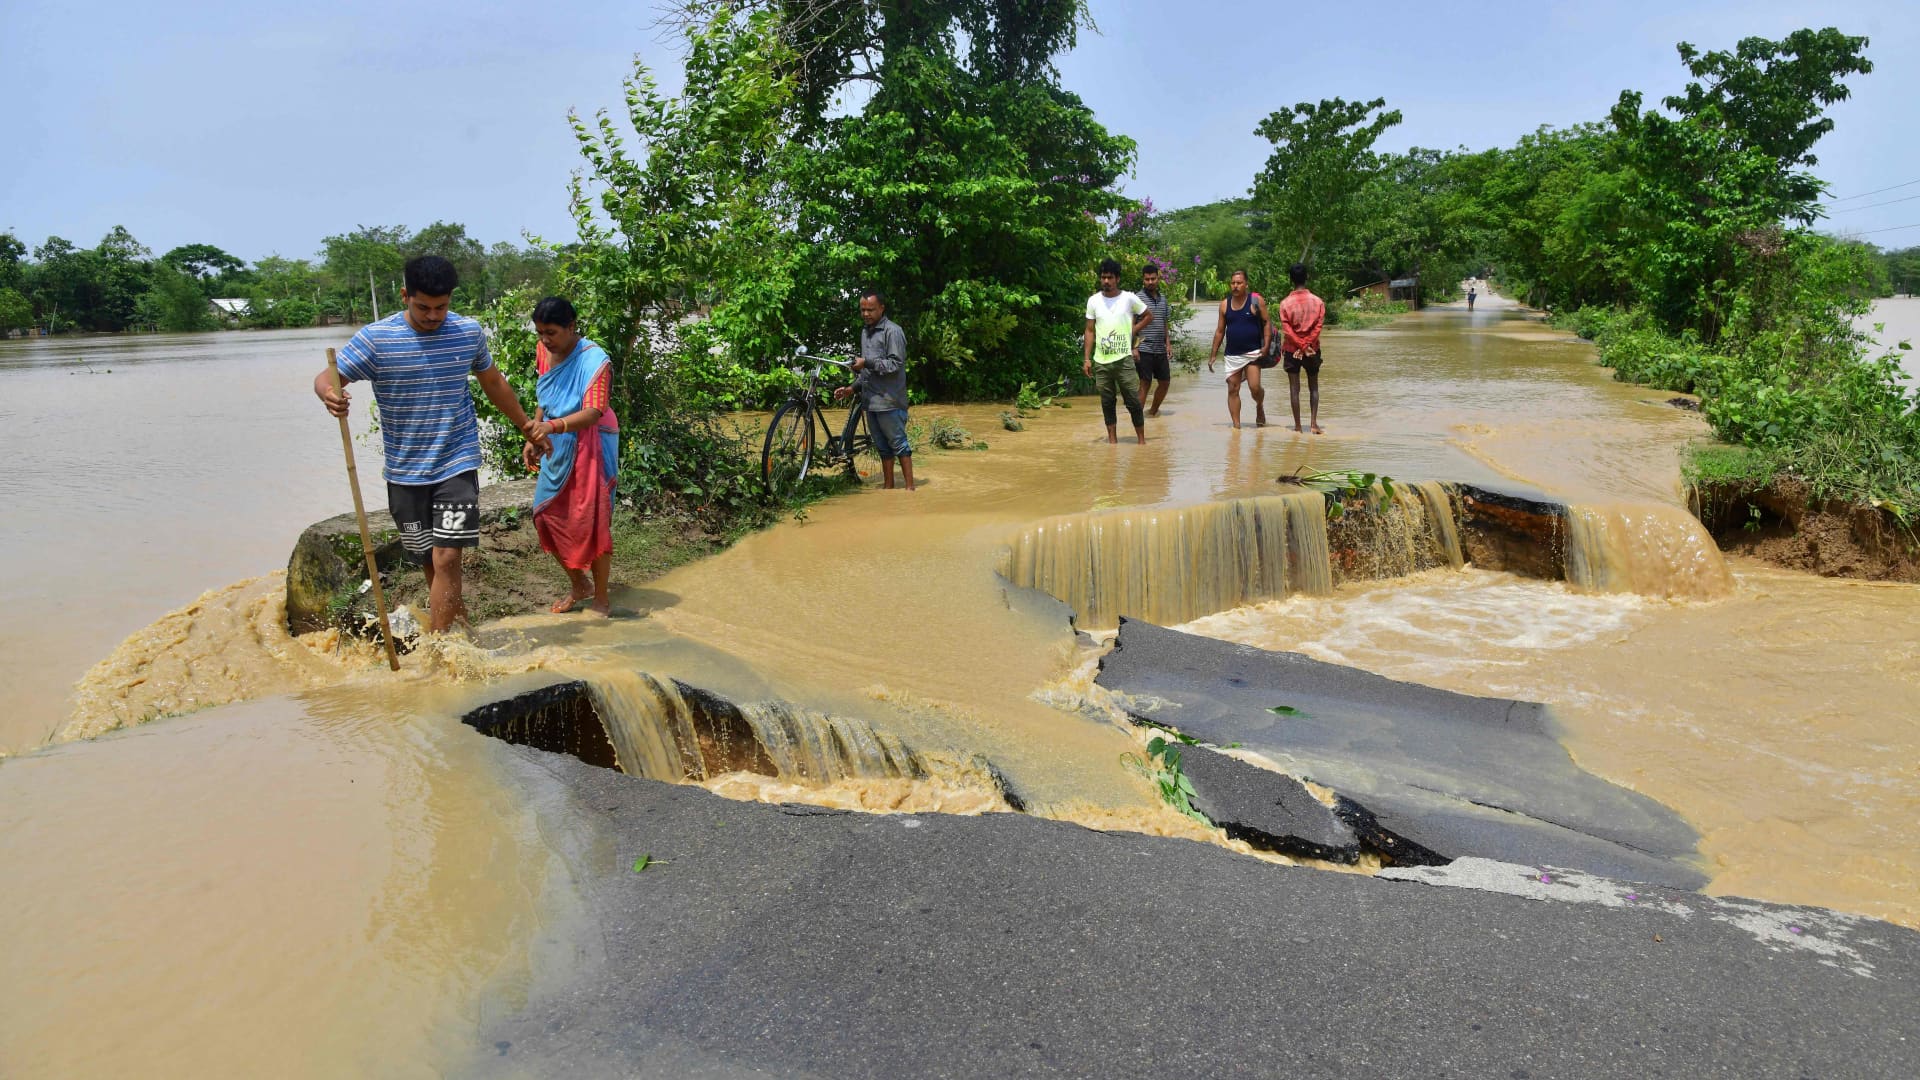 People wade through a road damaged by flood waters after heavy rains in Nagaon district, Assam state, on May 19, 2022.